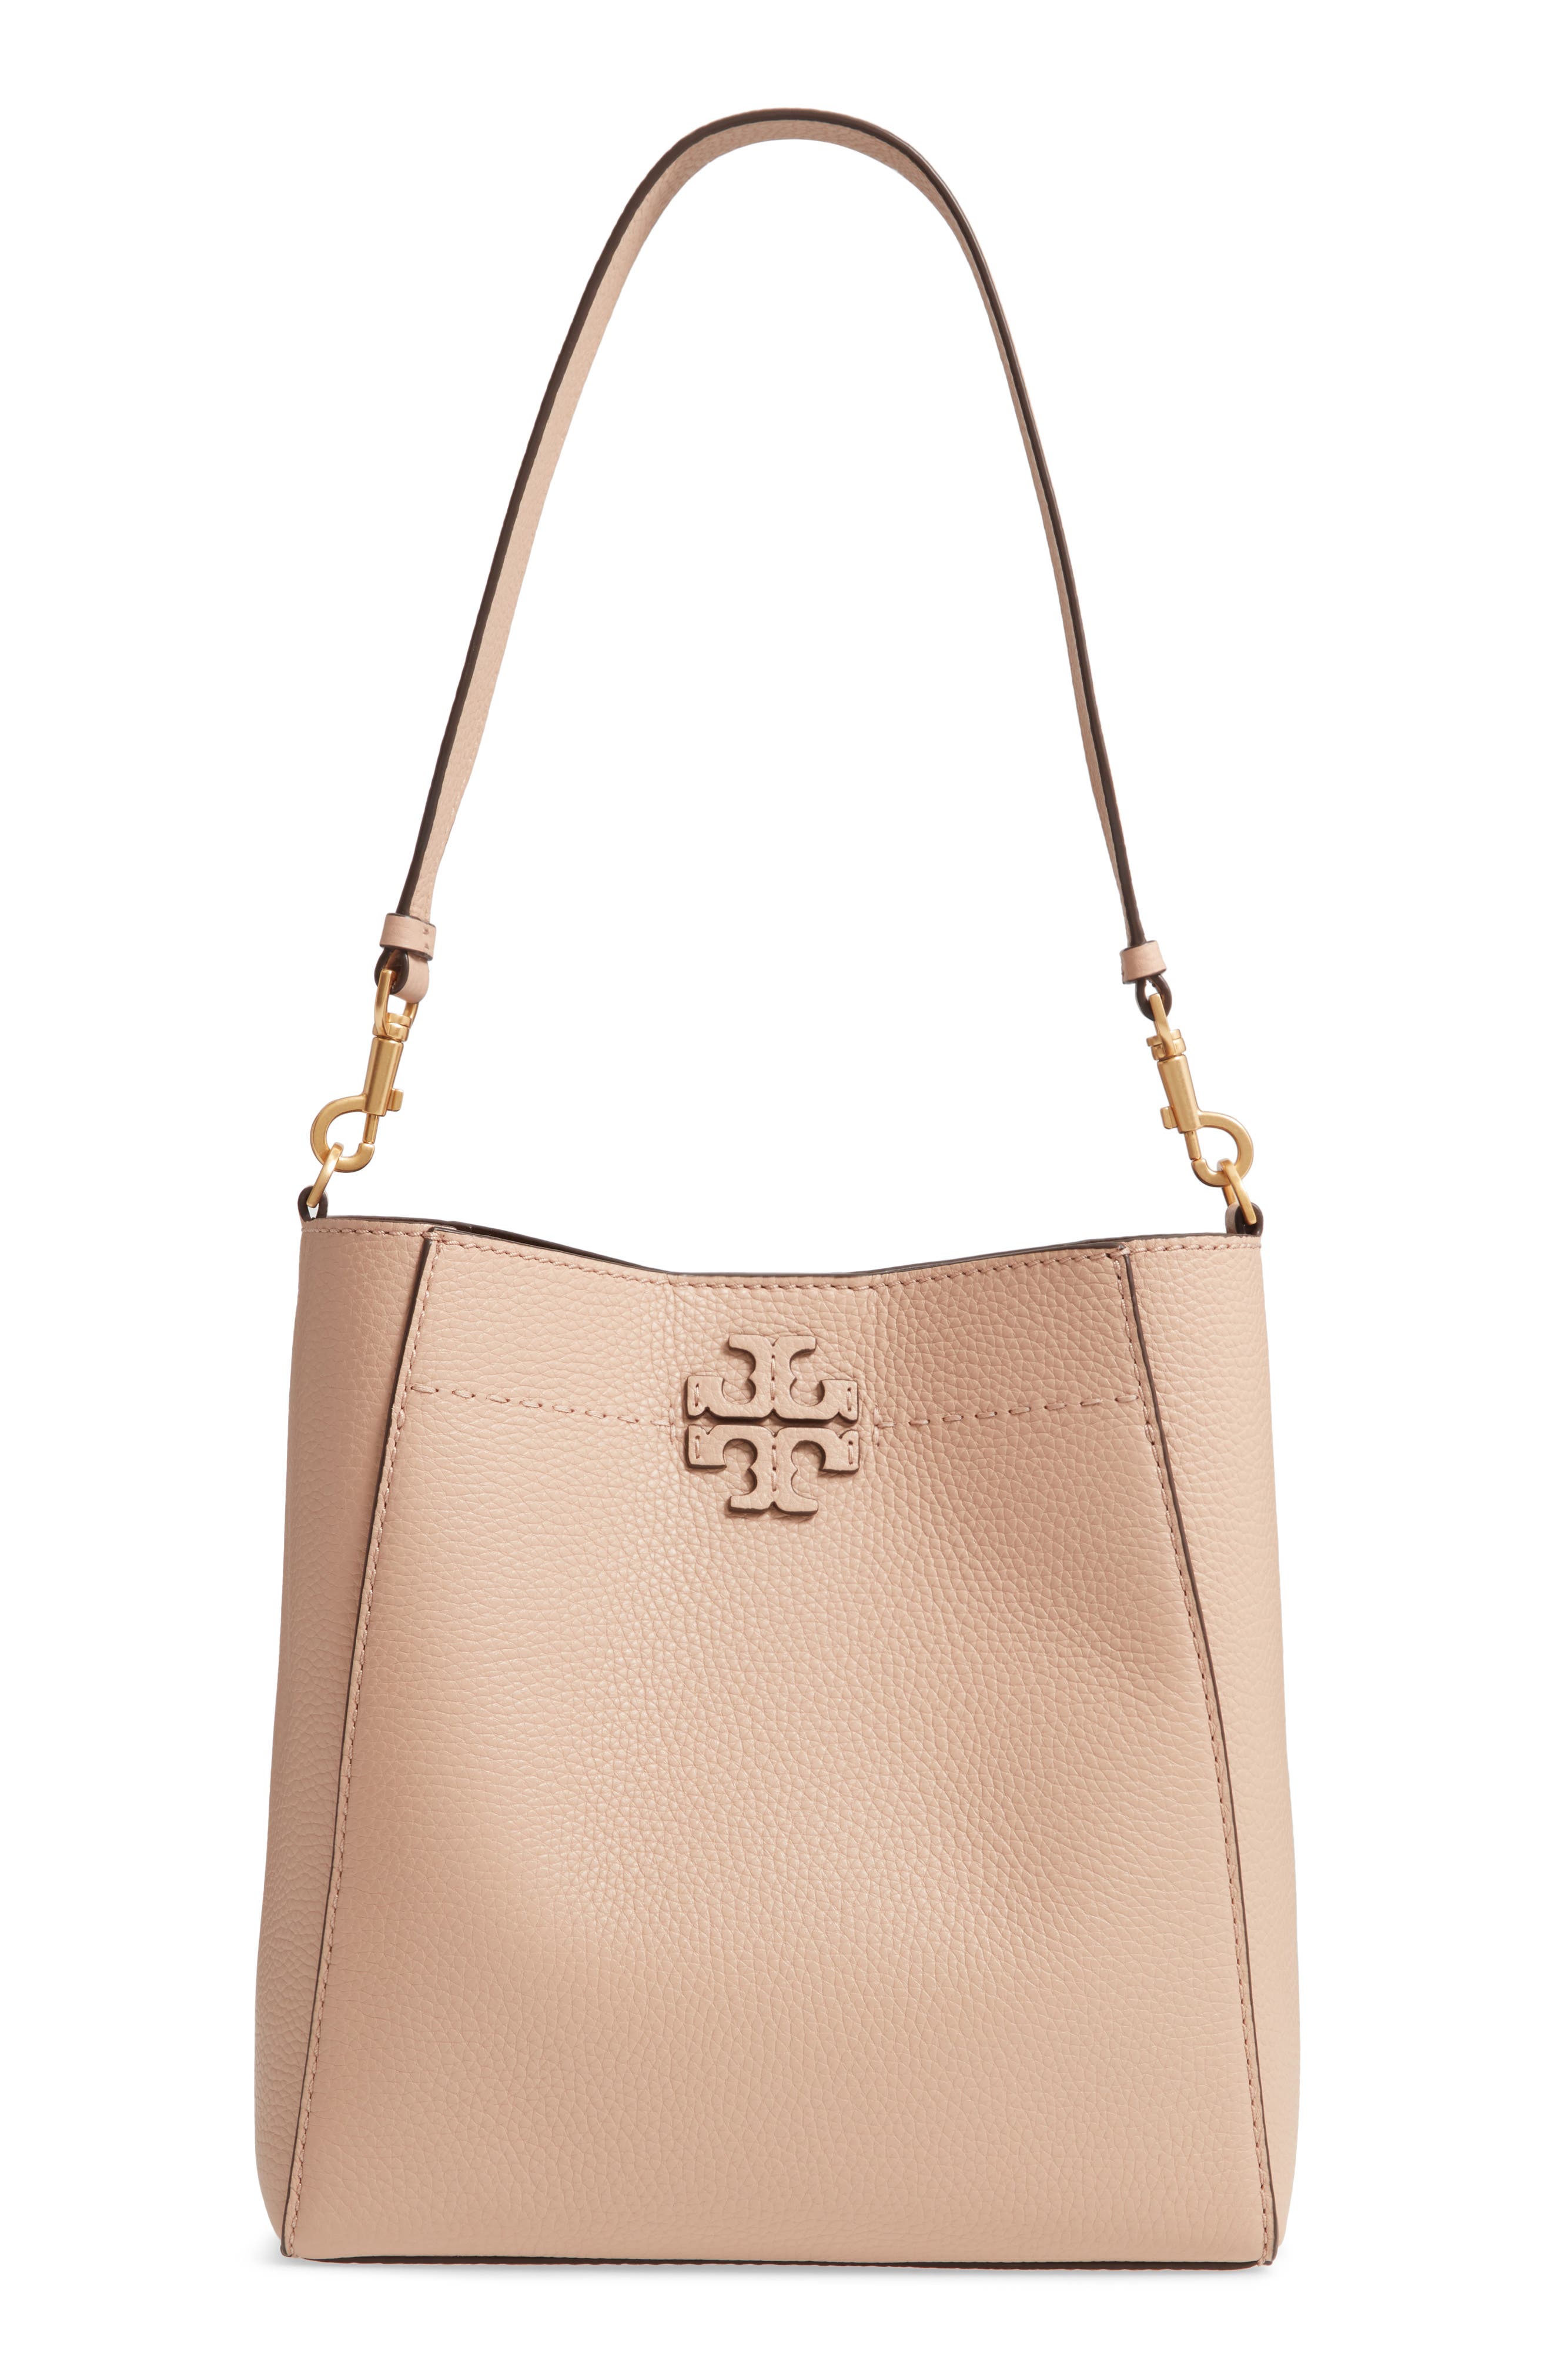 Tory Burch McGraw Leather Hobo | Nordstrom